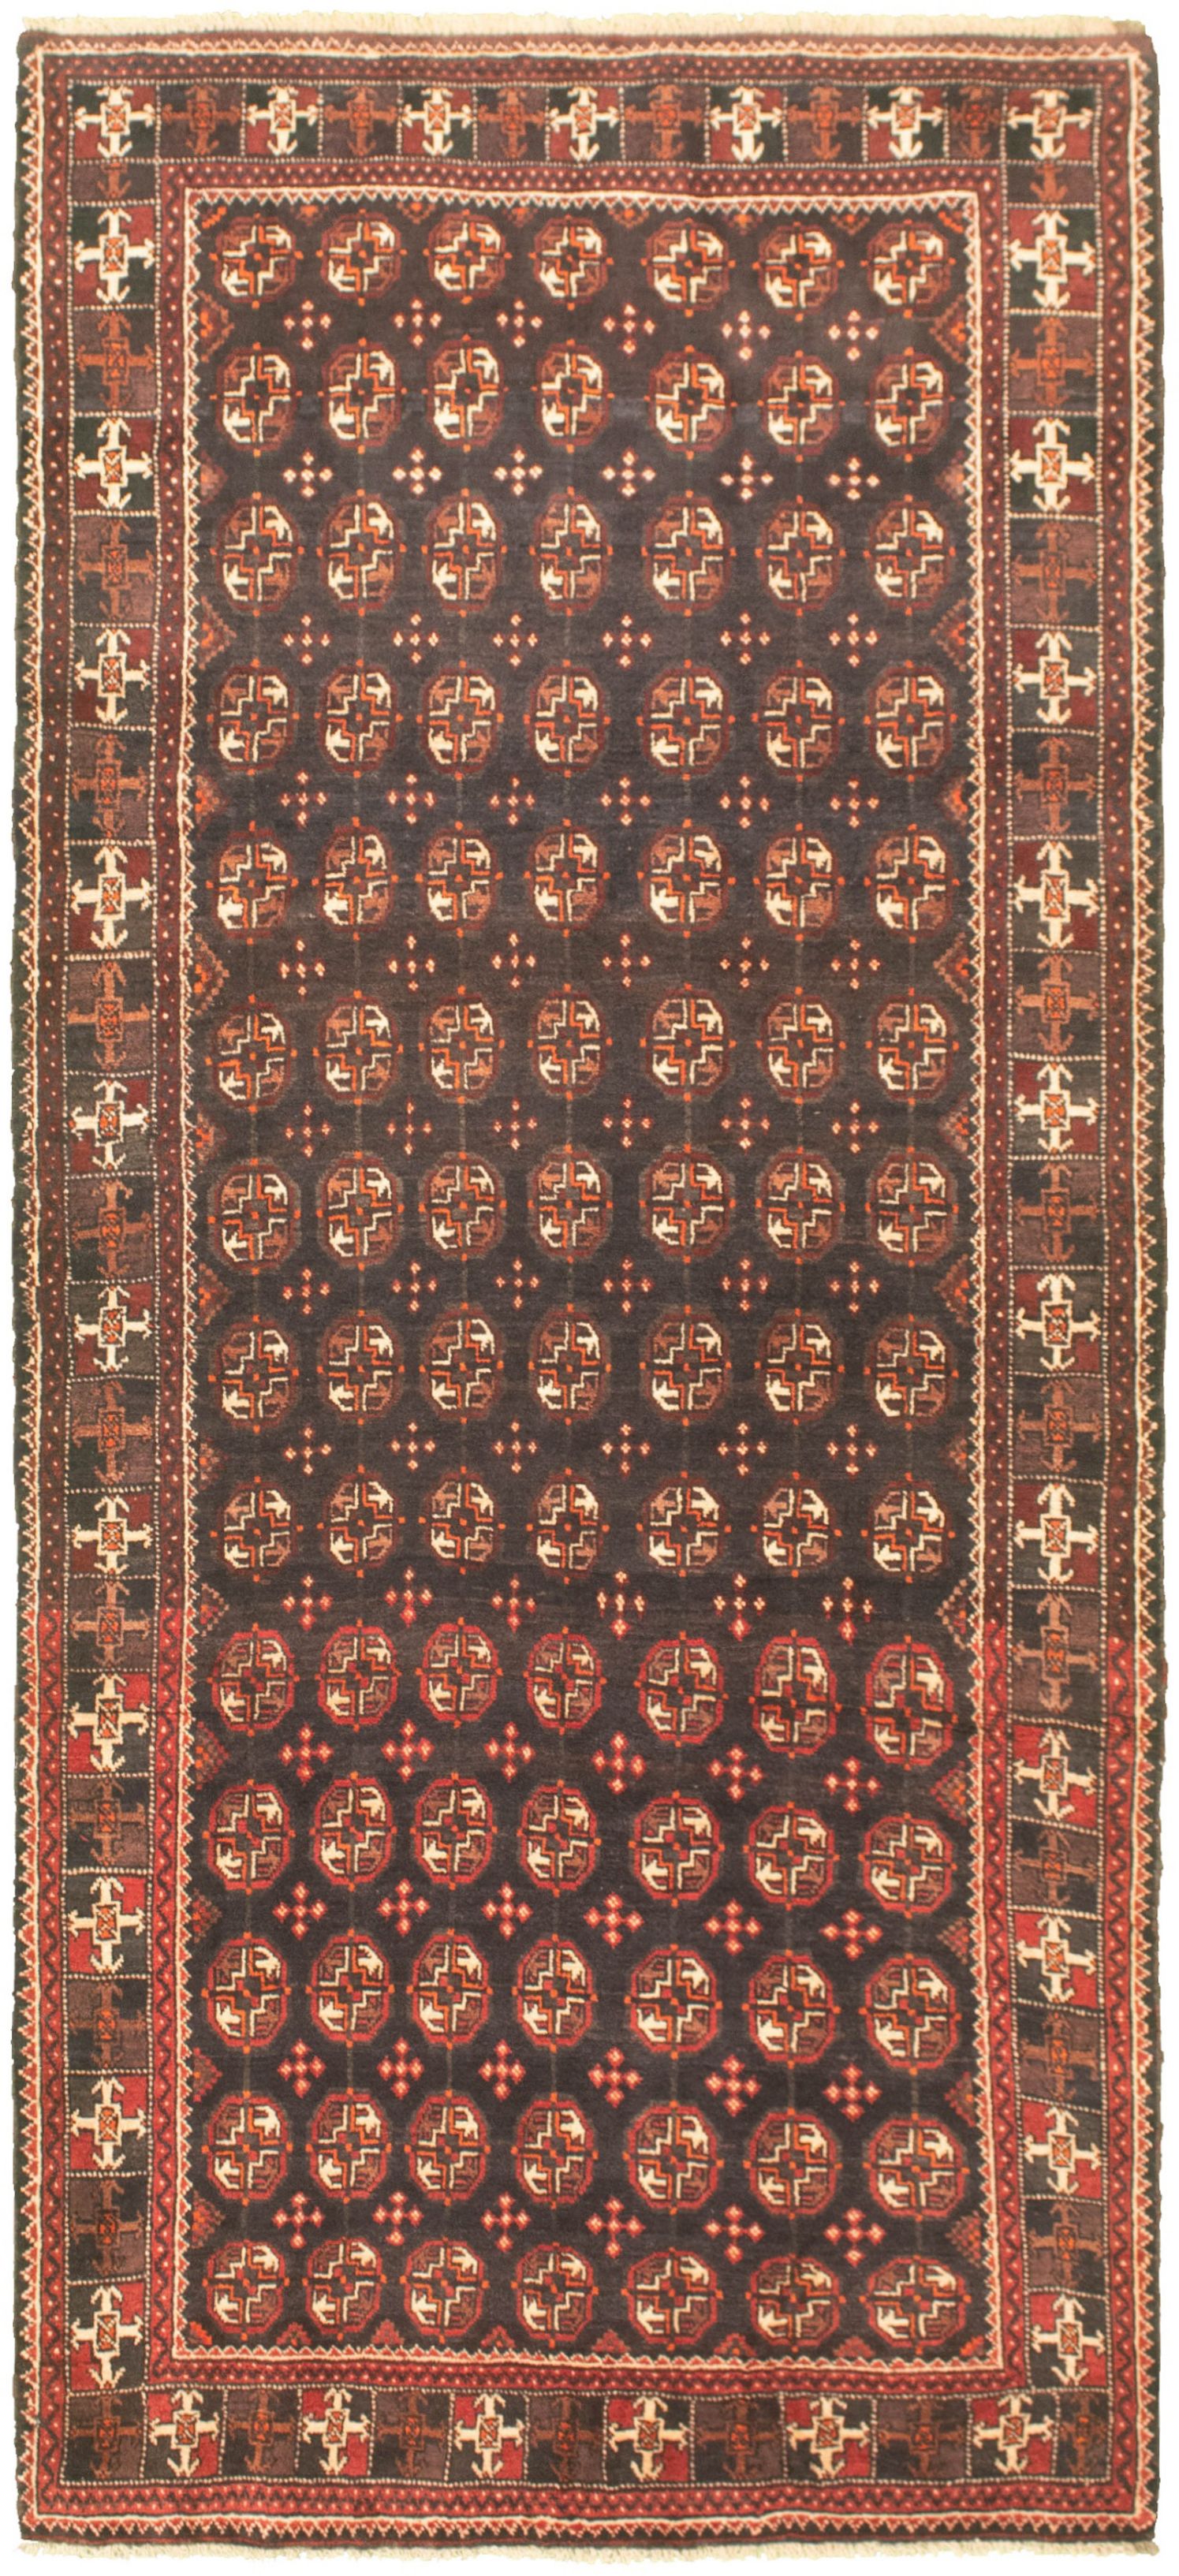 Hand-knotted Khal Mohammadi Black Wool Rug 4'1" x 9'2" Size: 4'1" x 9'2"  